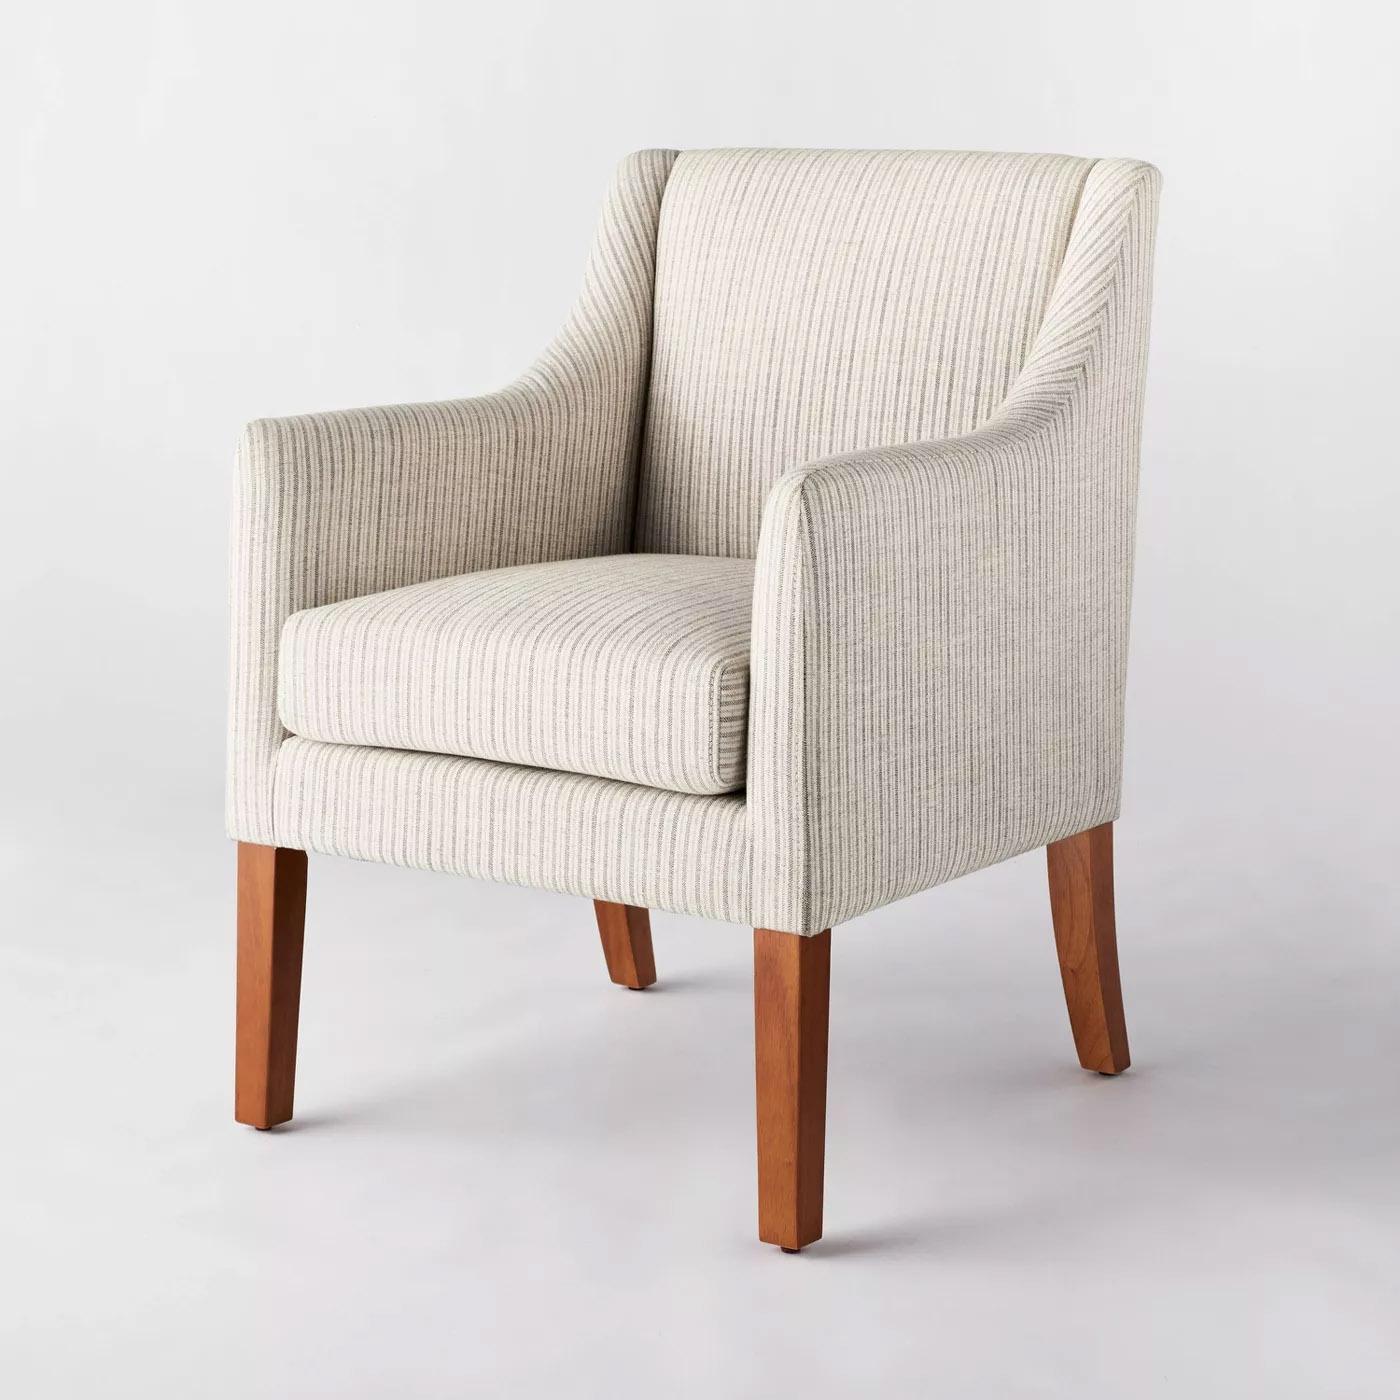 Studio McGee X Threshold Clearfield Swoop Arm Upholstered Dining Chair for $75.90